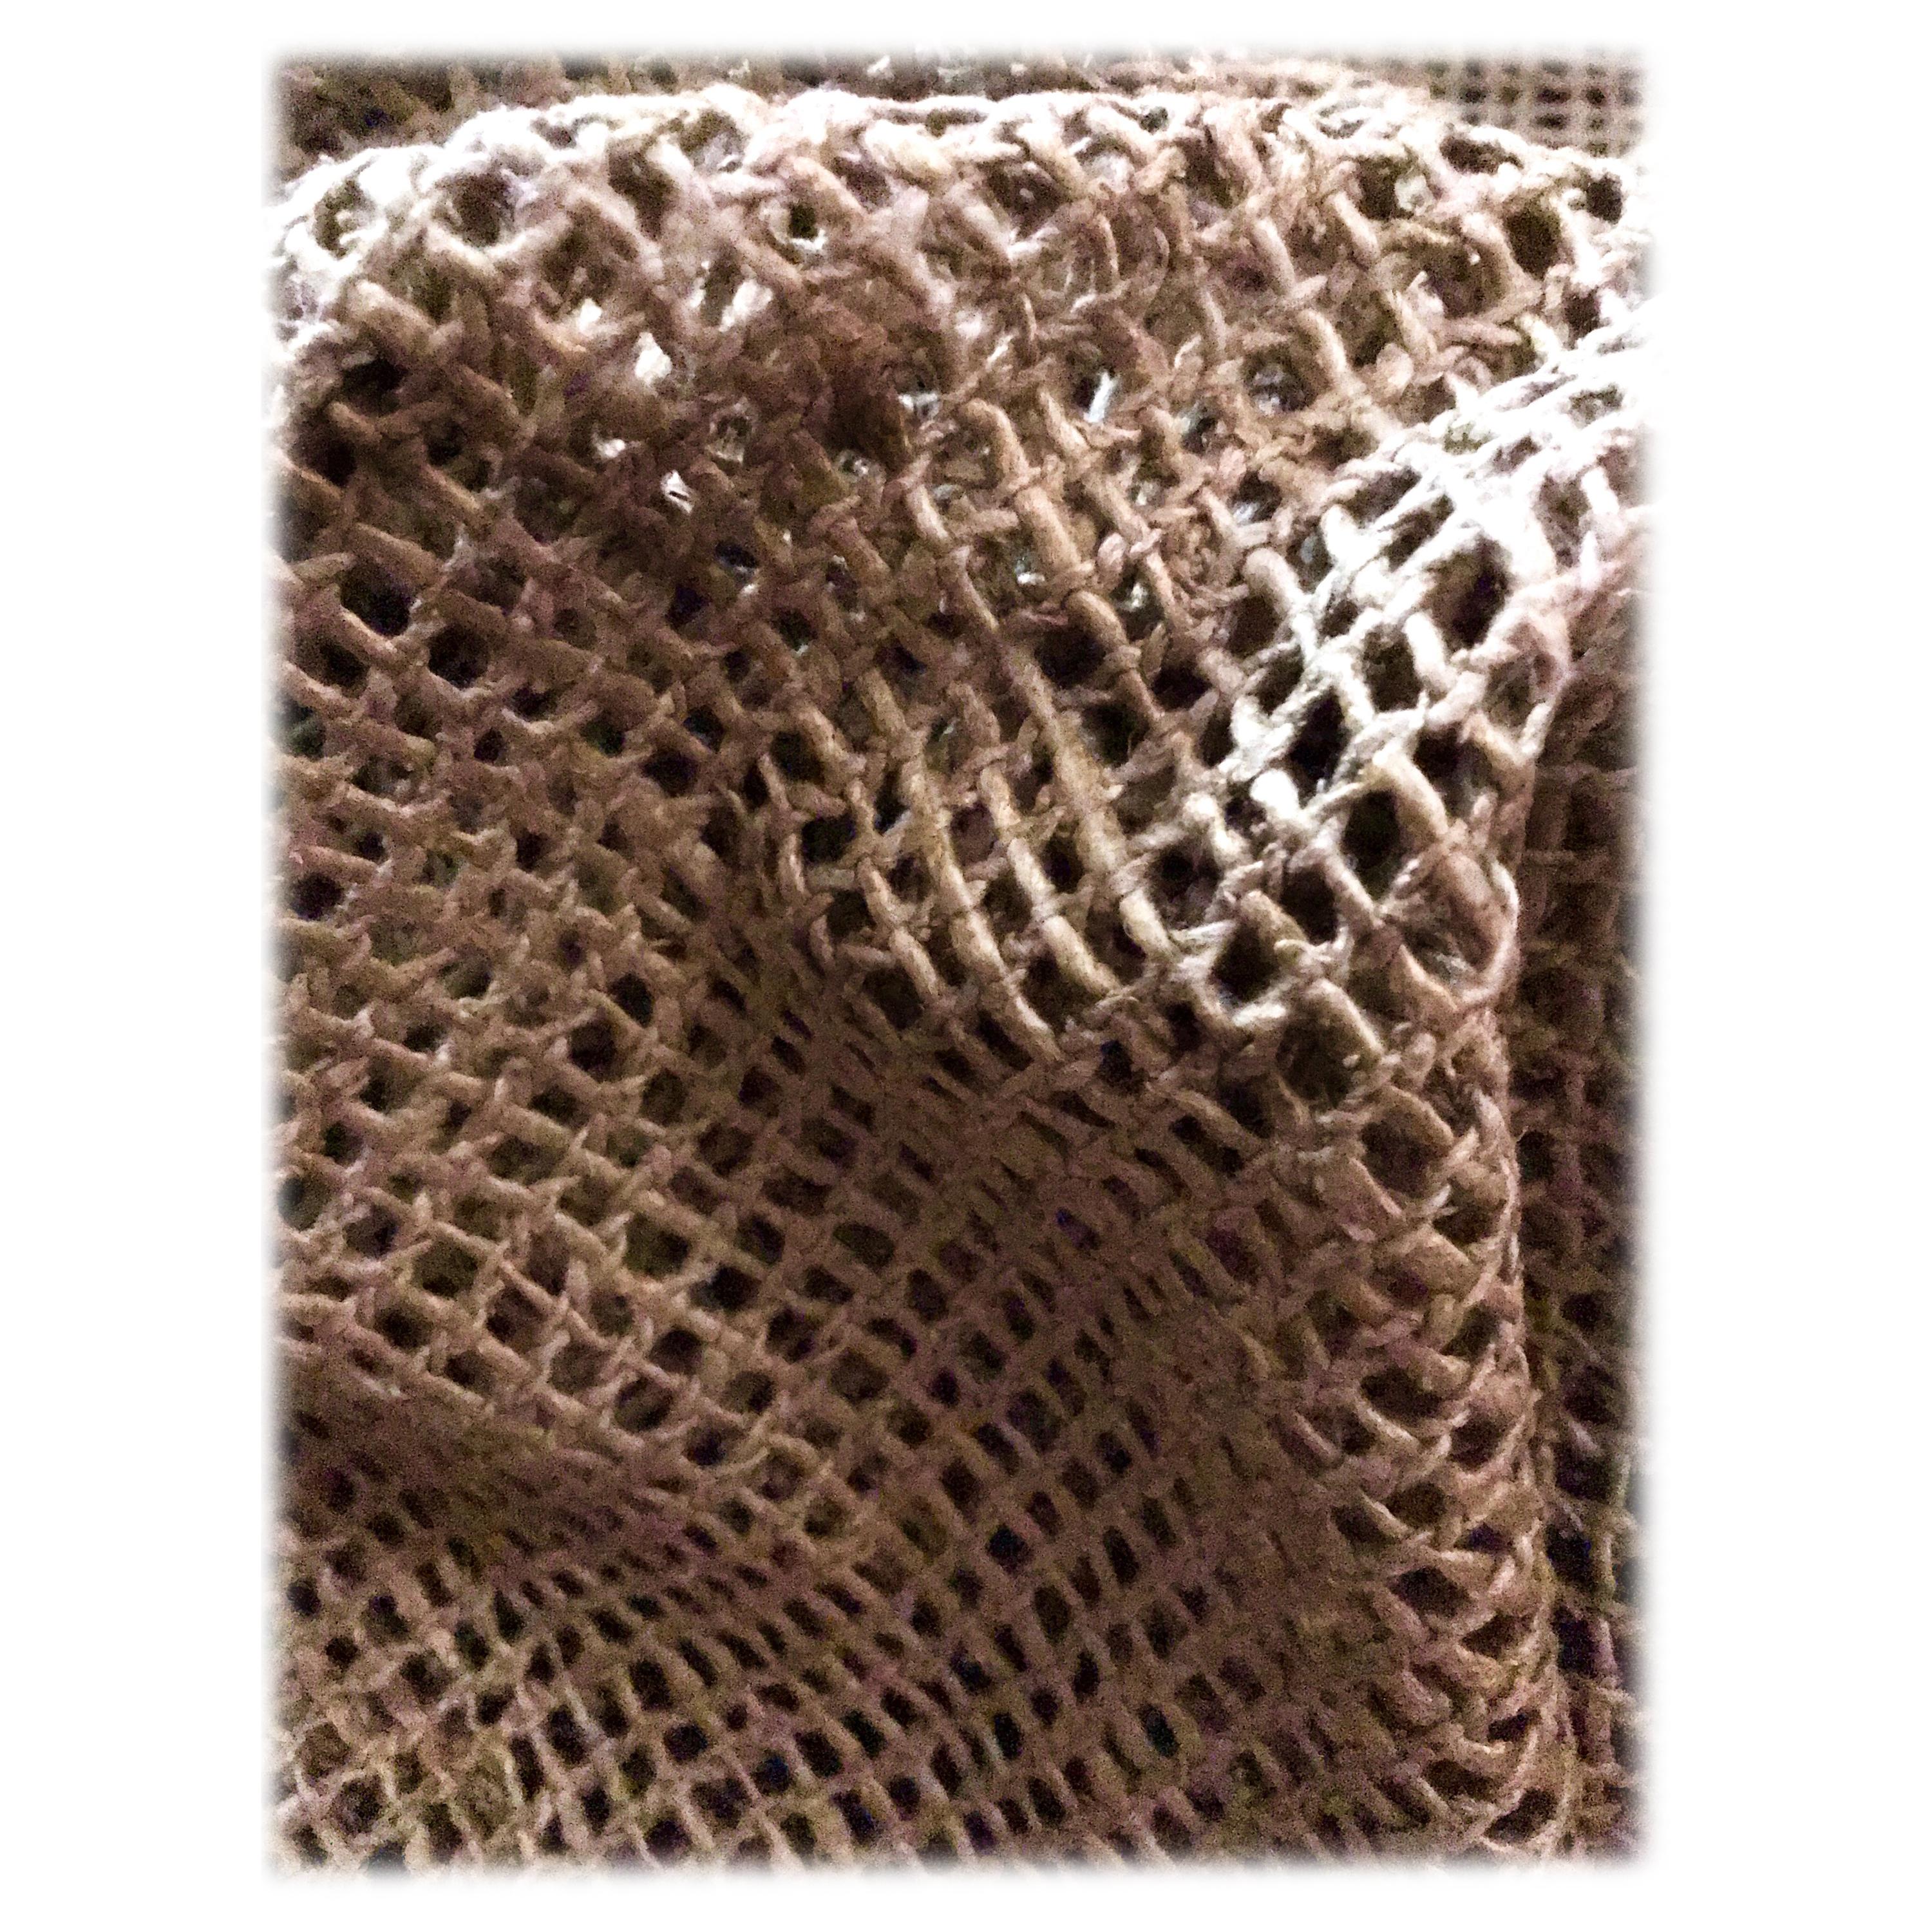 Completely woven, sophisticated and luxurious raw silk netting in an unusual color of natural beige brown. Breathtaking, buttery hand, wonderful drape, and natural glow. Super textural, earthy, natural, luxurious. 100% finest quality Italian raw